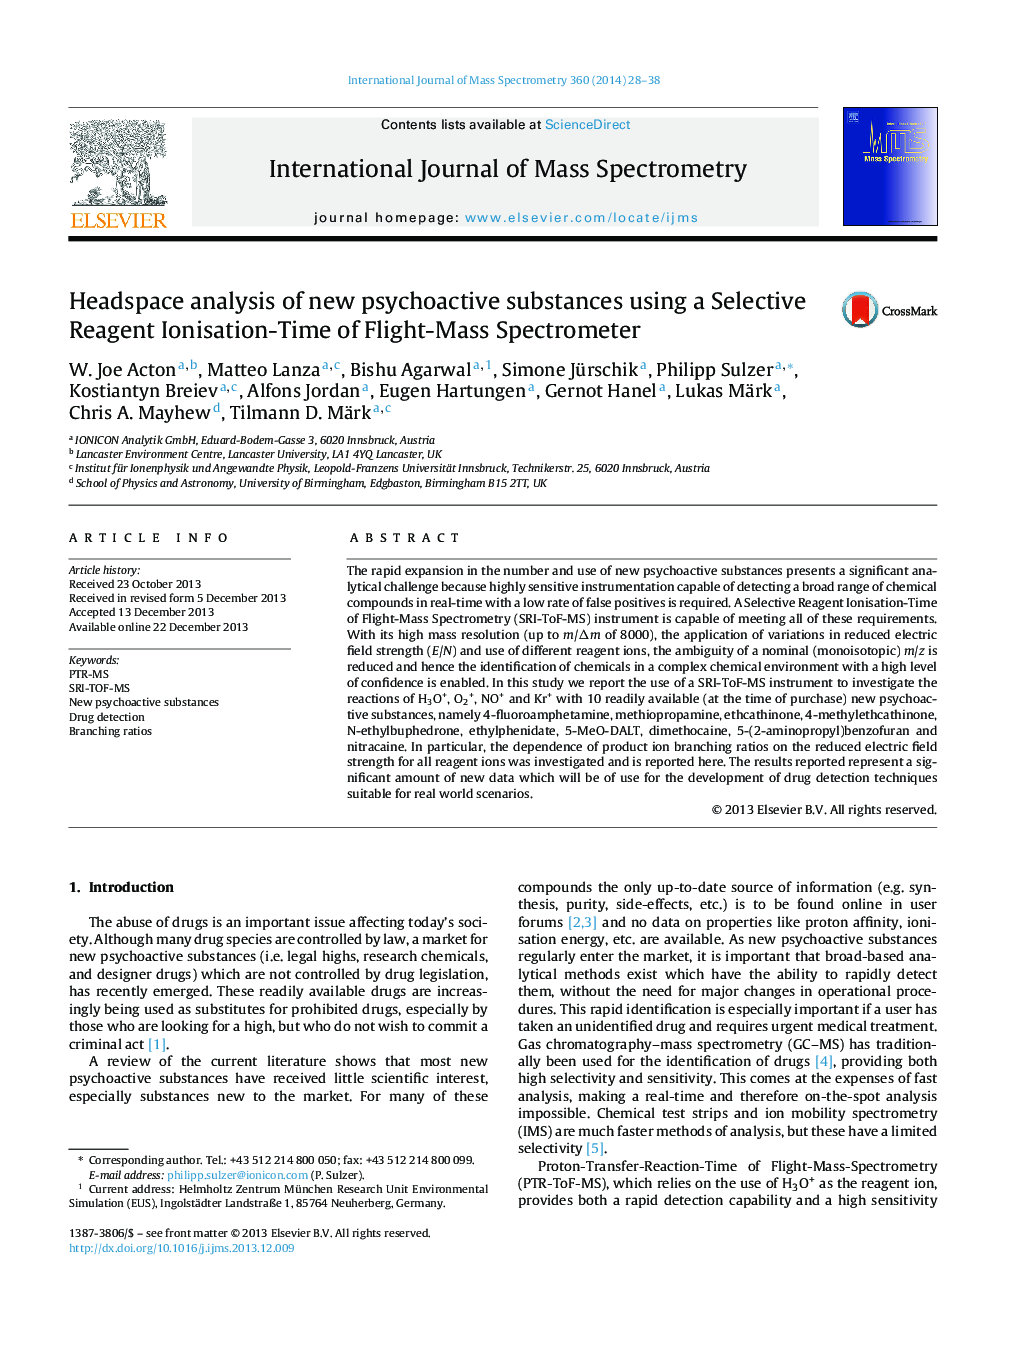 Headspace analysis of new psychoactive substances using a Selective Reagent Ionisation-Time of Flight-Mass Spectrometer